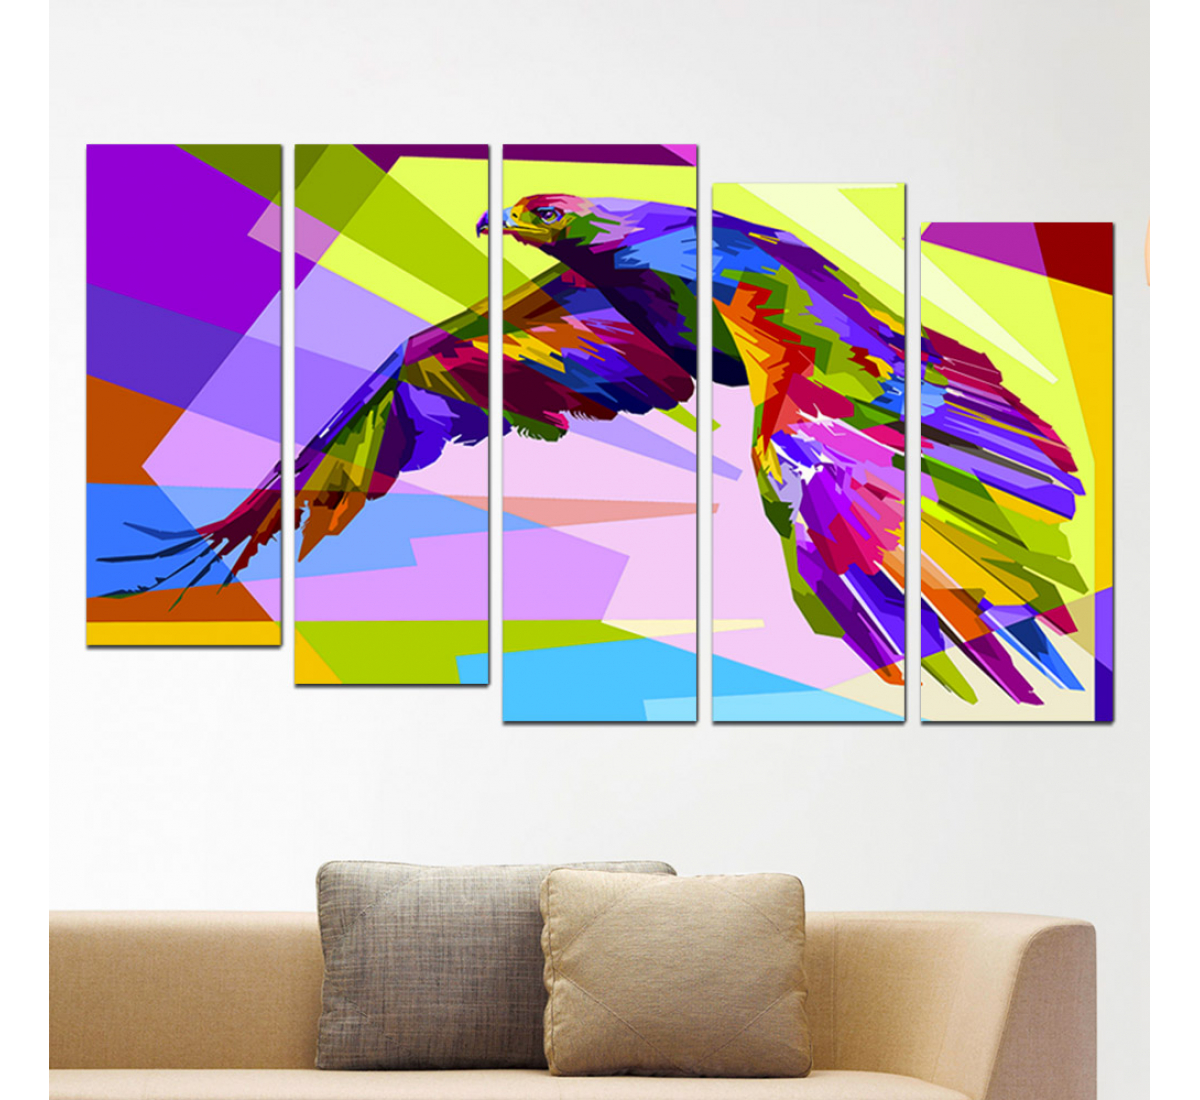 A Beginner’s Guide to Abstract Wall Art: What You Need to Know